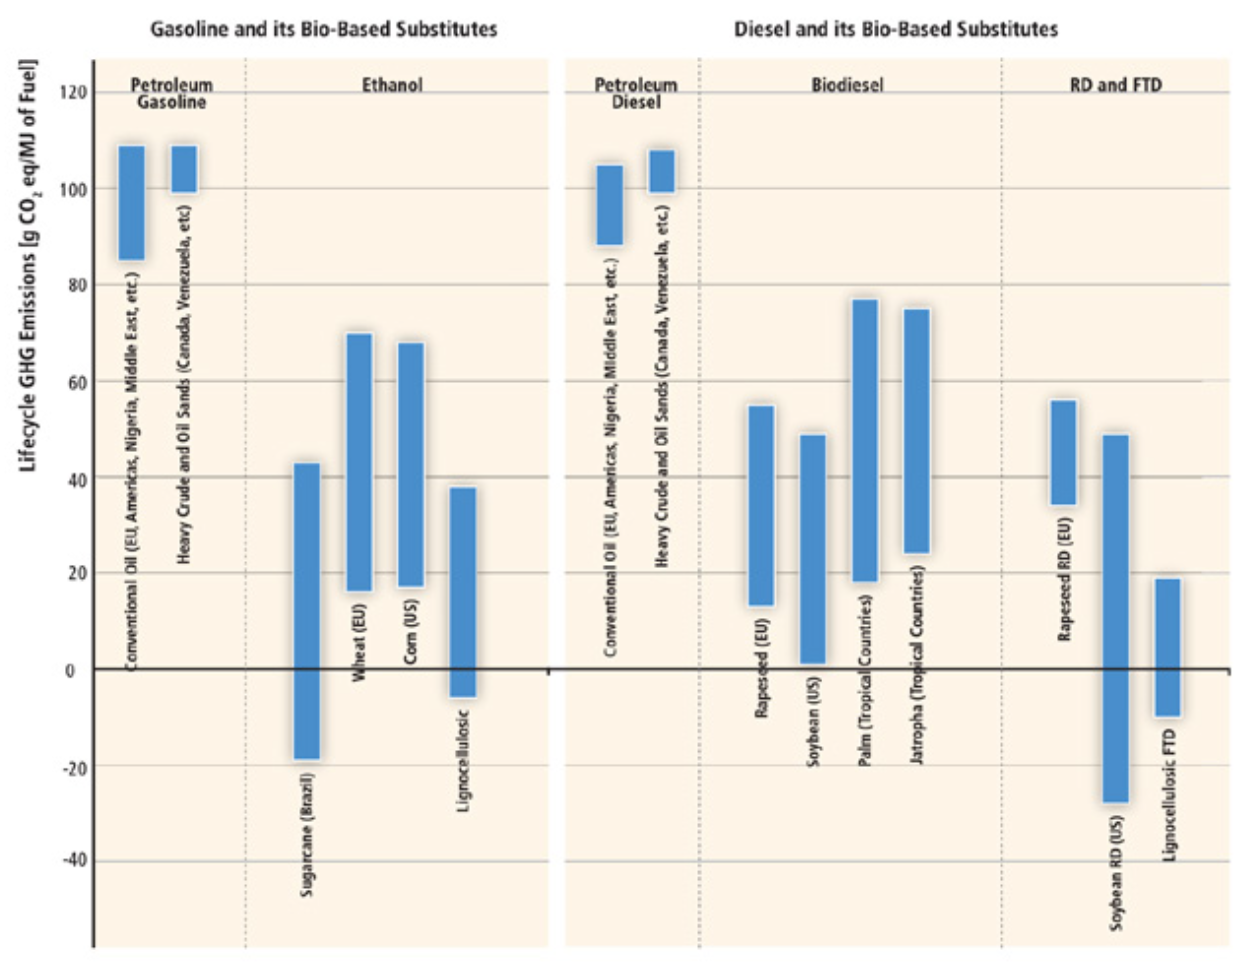 FIGURE 3.4. Ranges of life cycle GHG emissions of petroleum fuels, first-generation biofuels and selected next- generation lignocellulosic biofuels without considering land use change (Edenhofer, et al., Renewable Energy Sources and Climate Change Mitigation)